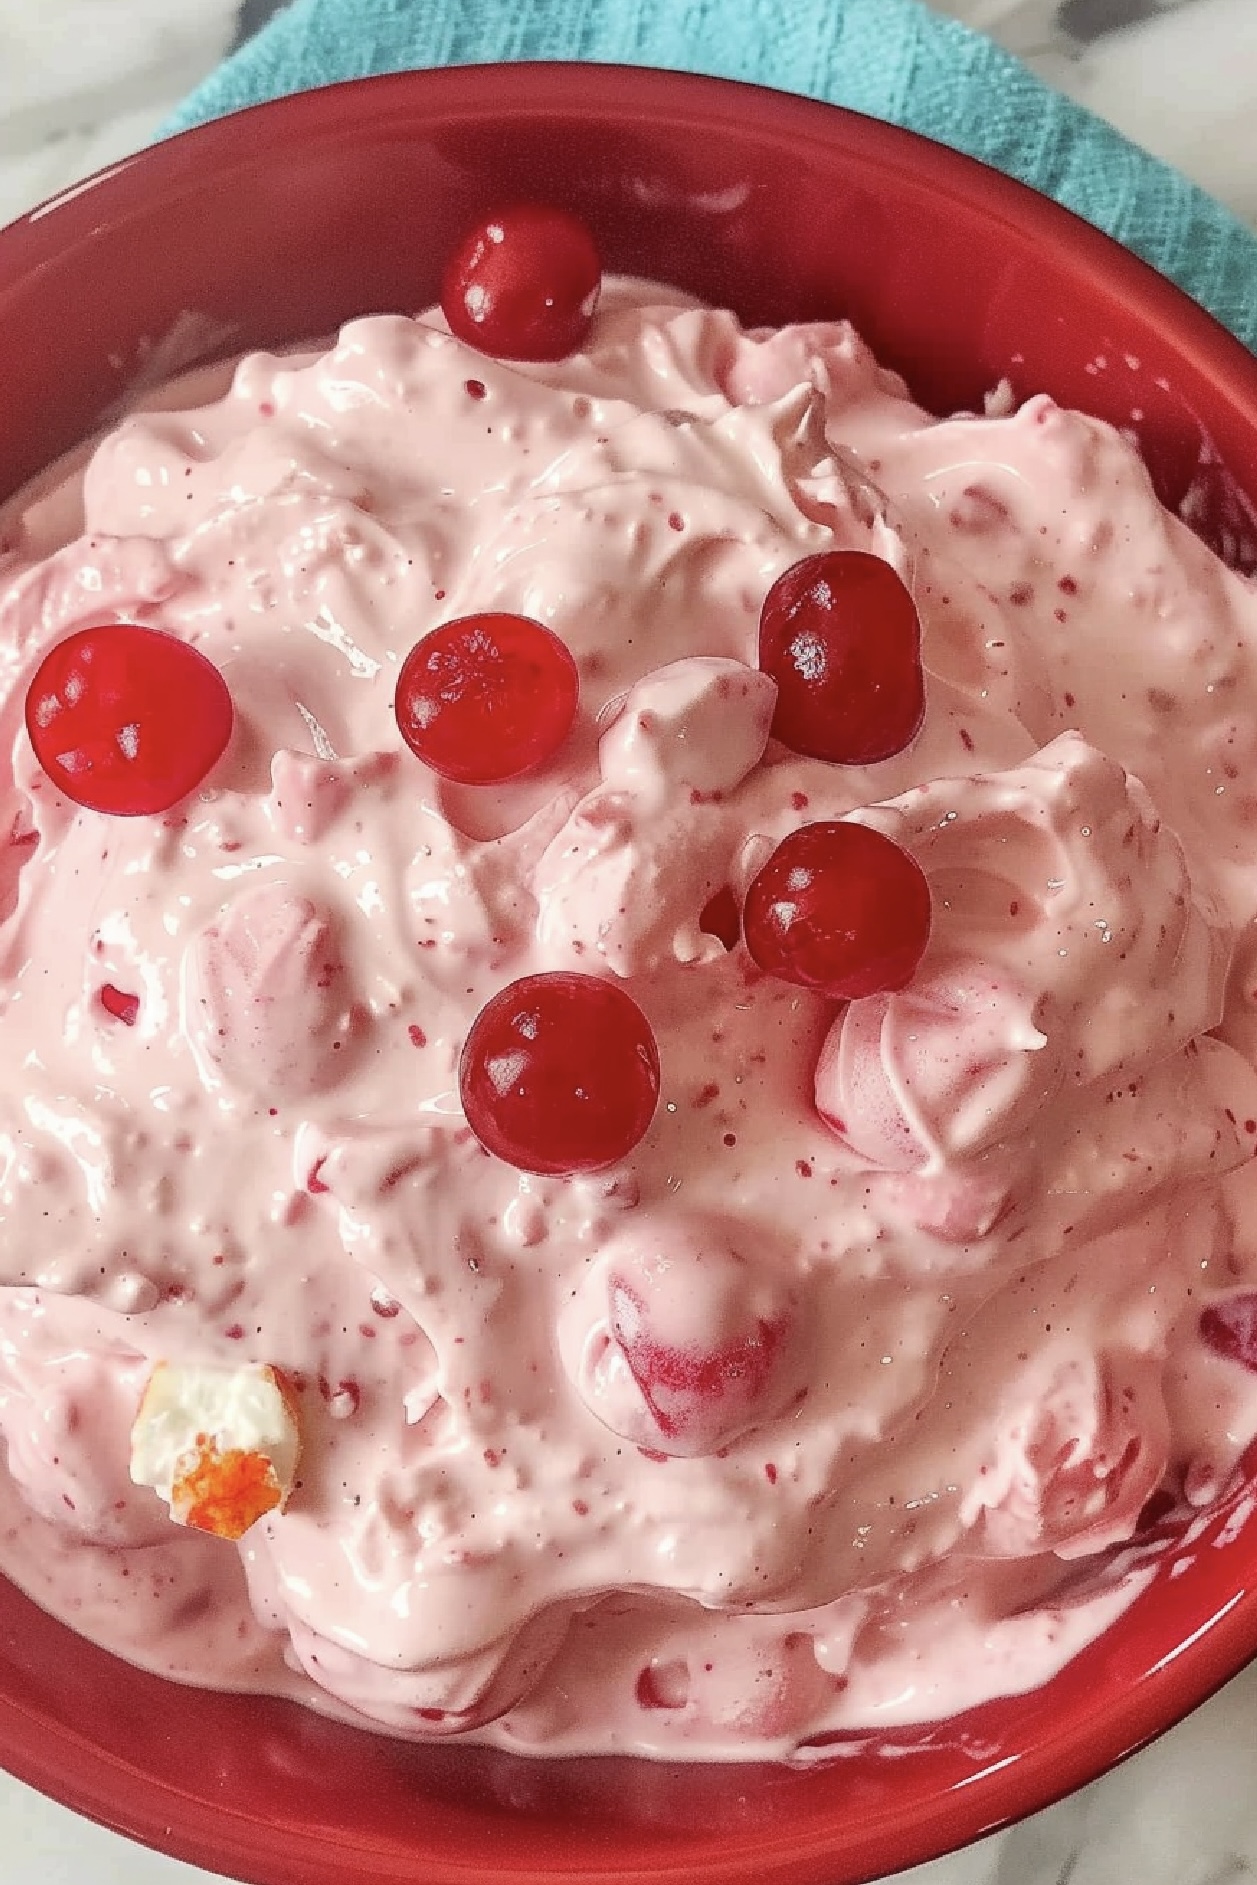 Impress with this simple yet luxurious cherry dessert.